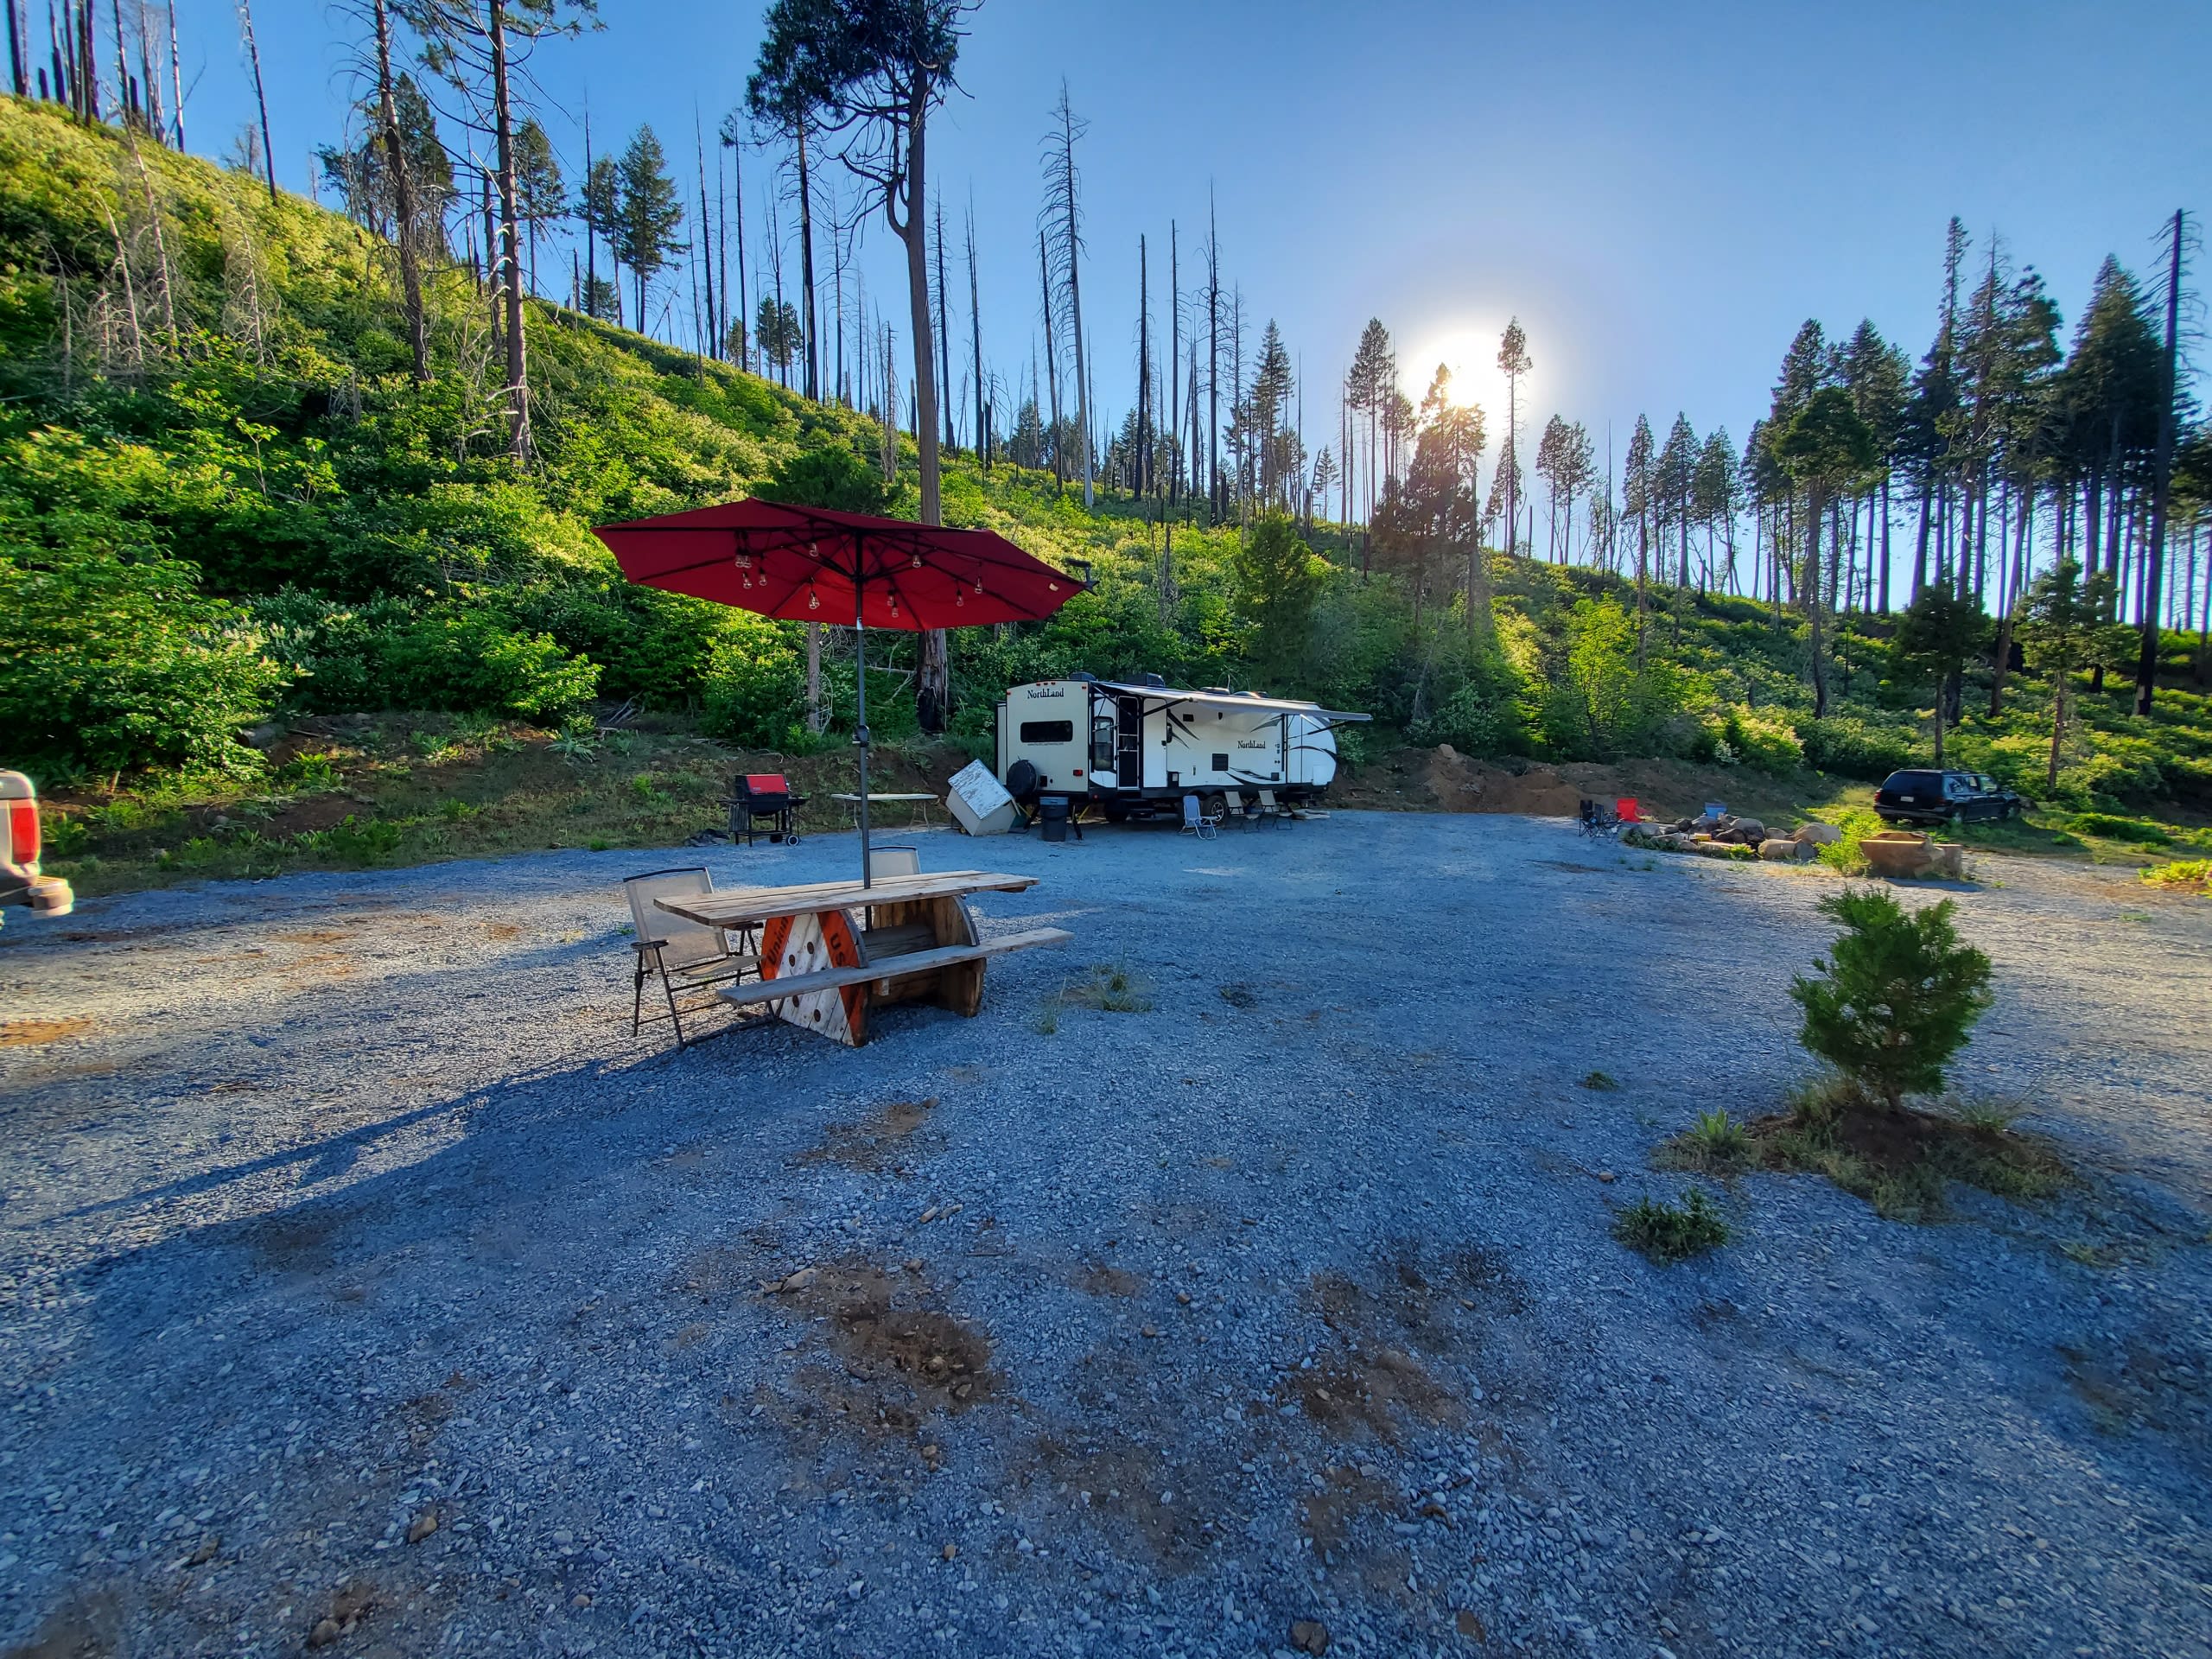 Your private campground and trailer.